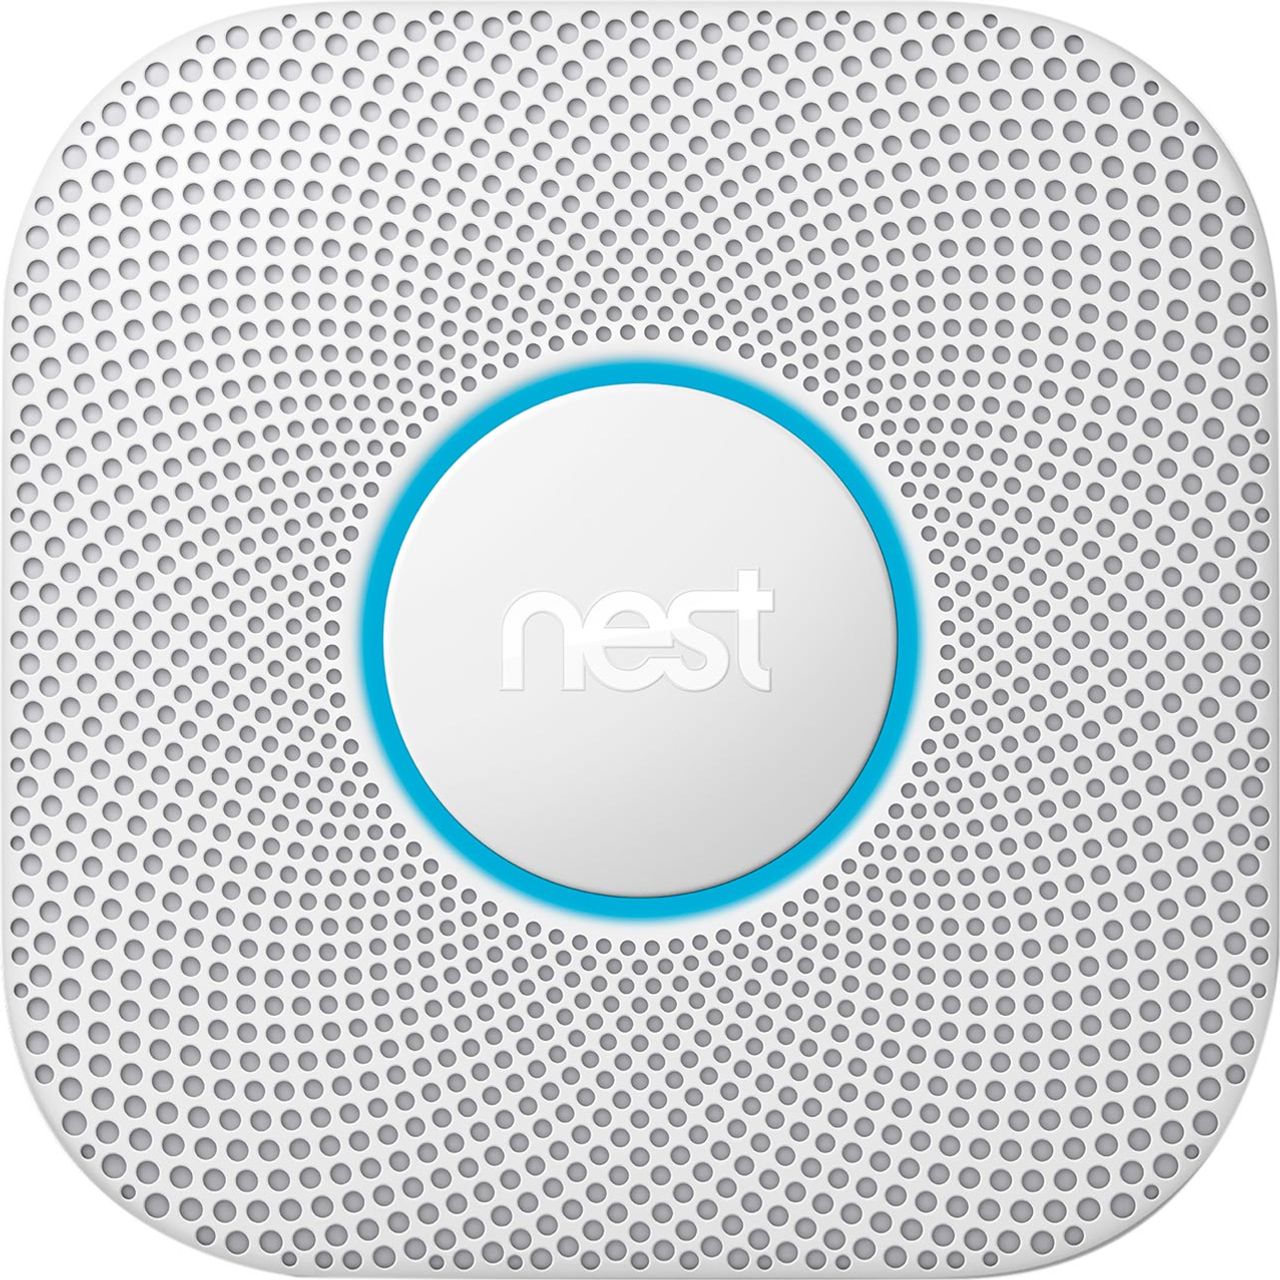 Nest Protect Smart Smoke and CO Alarm Review